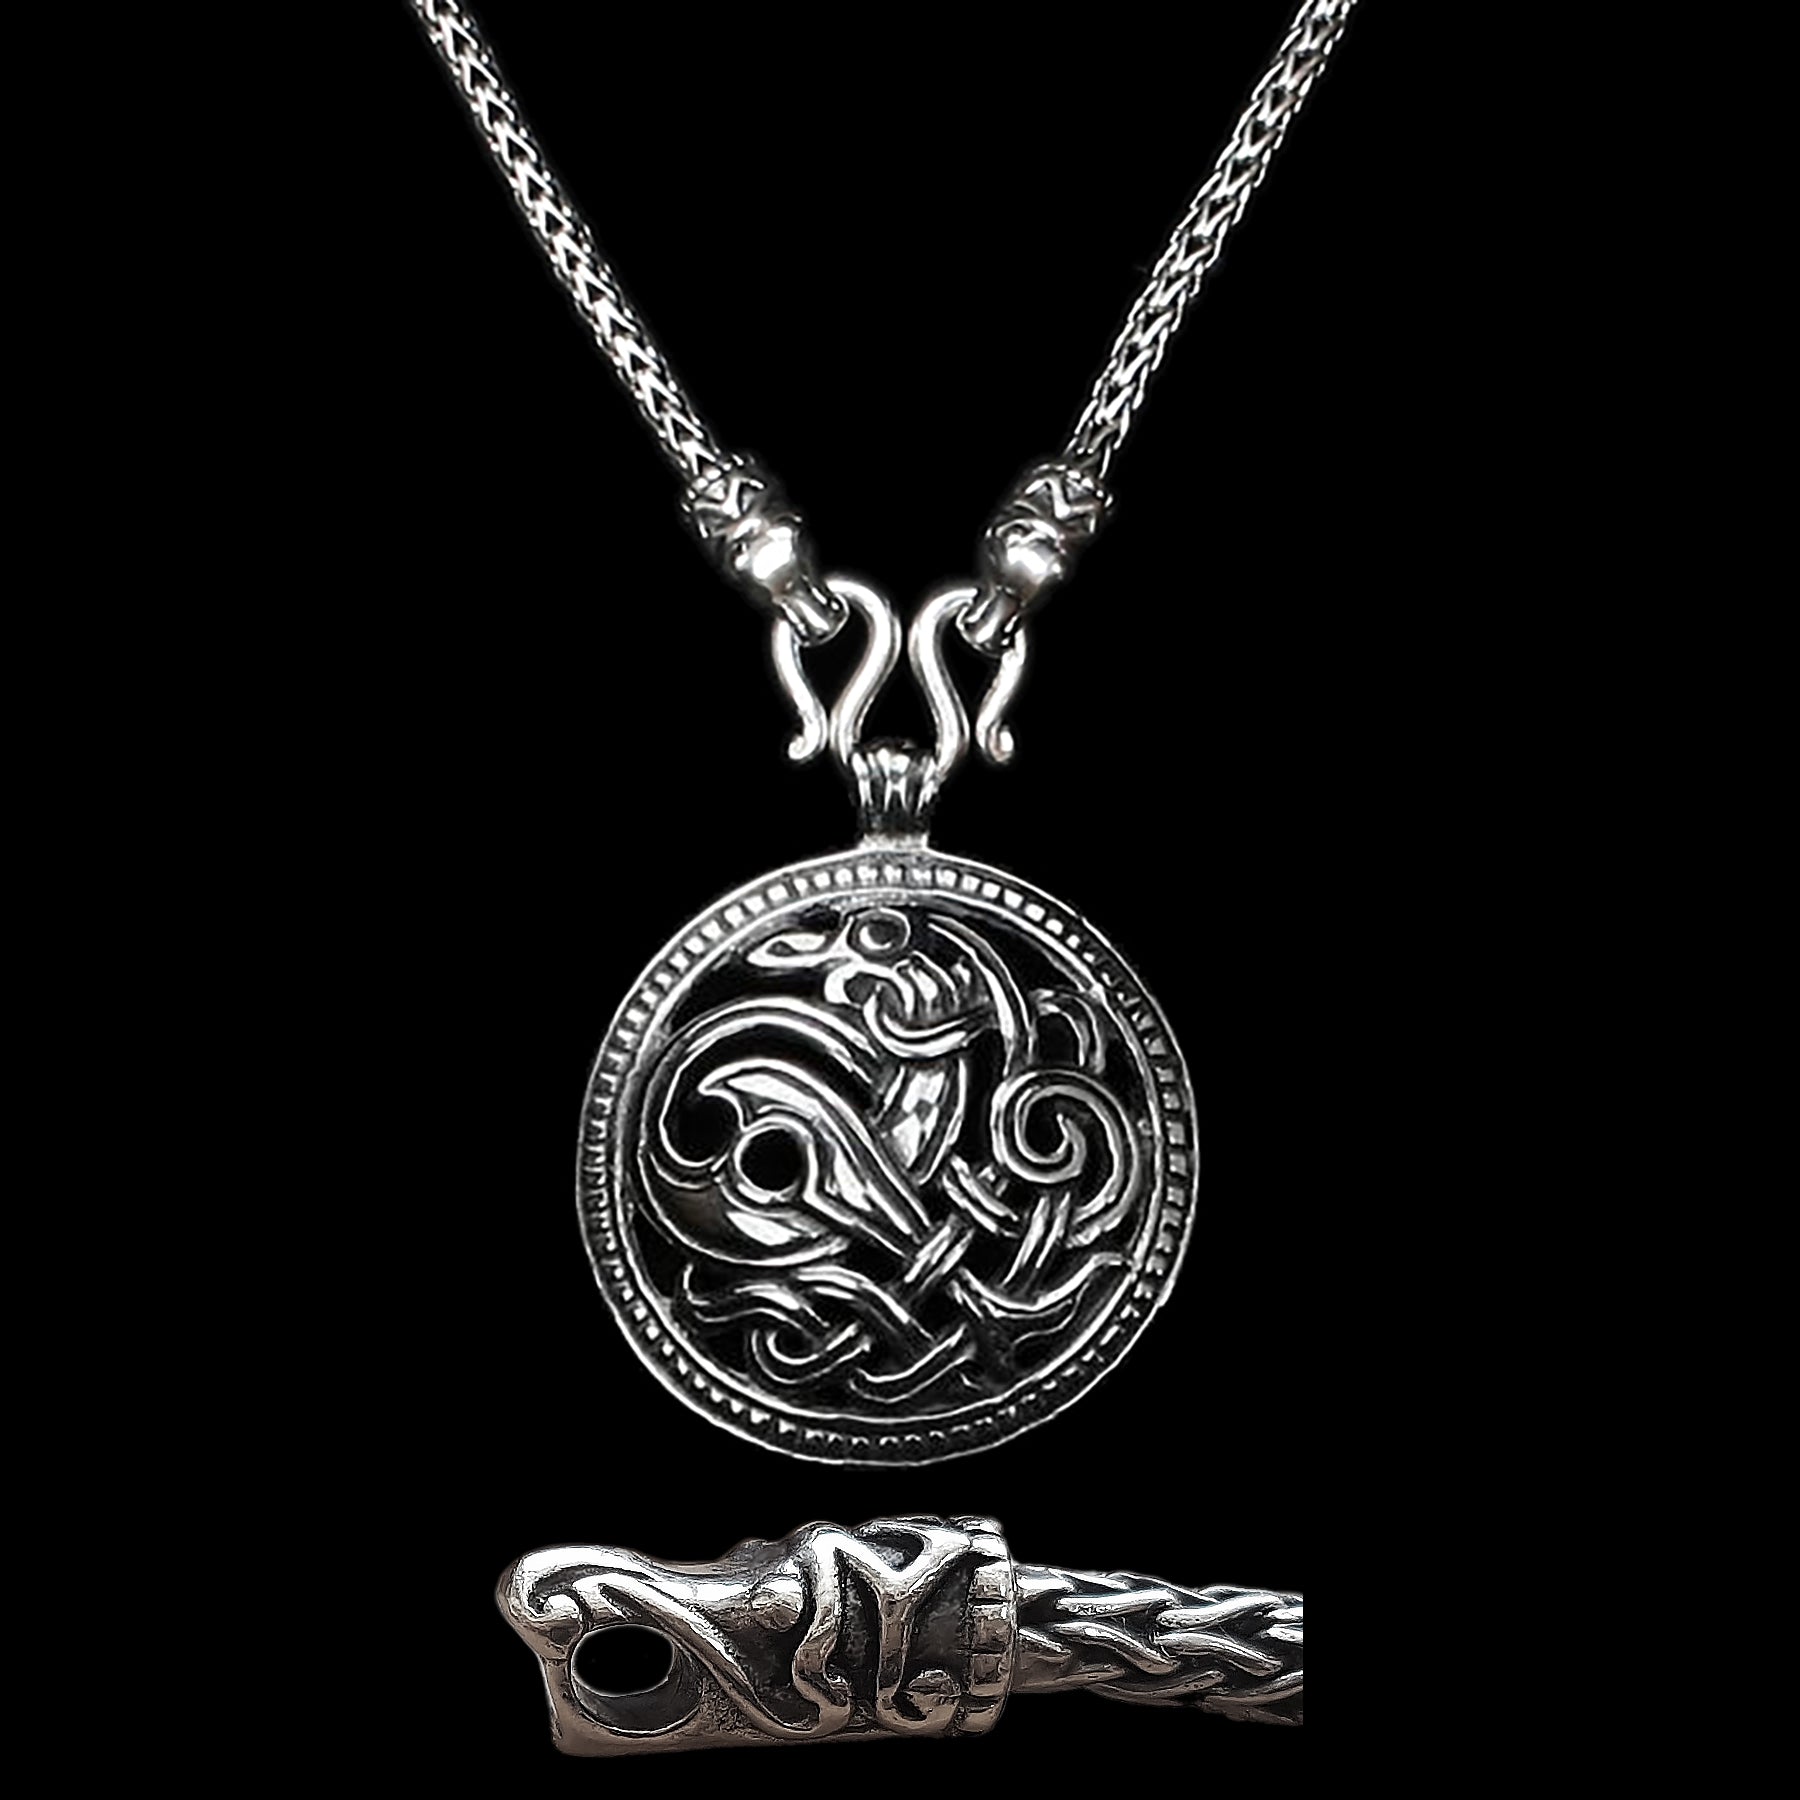 Sterling Silver Viking Snake Chain Necklace with Gotlandic Dragon Heads & Jelling Dragon Pendant